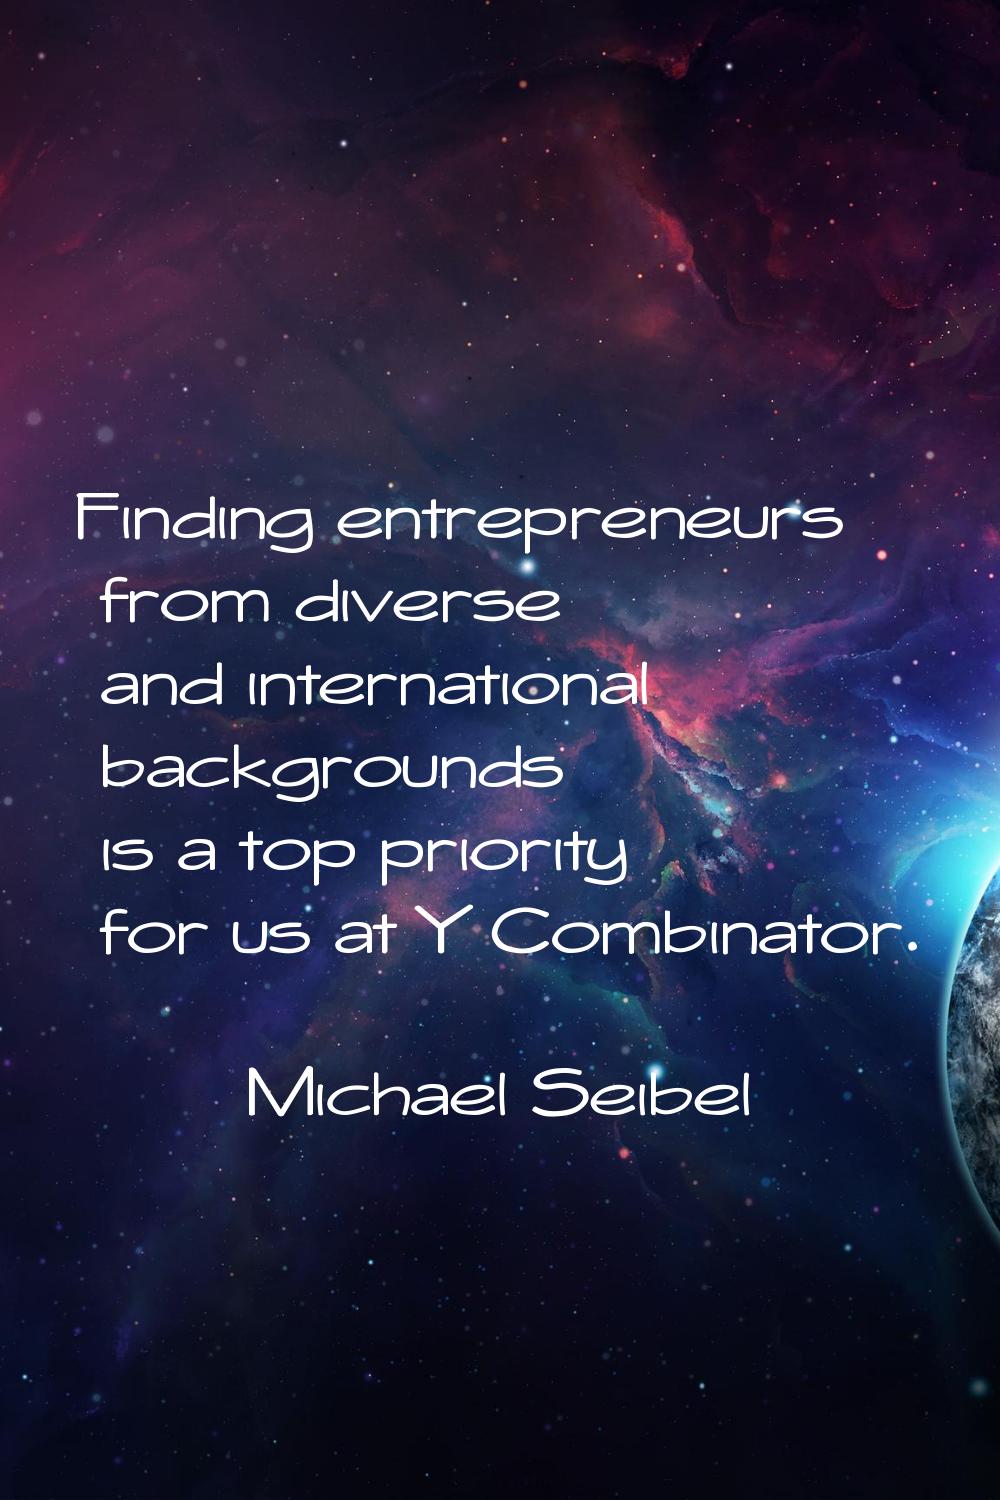 Finding entrepreneurs from diverse and international backgrounds is a top priority for us at Y Comb